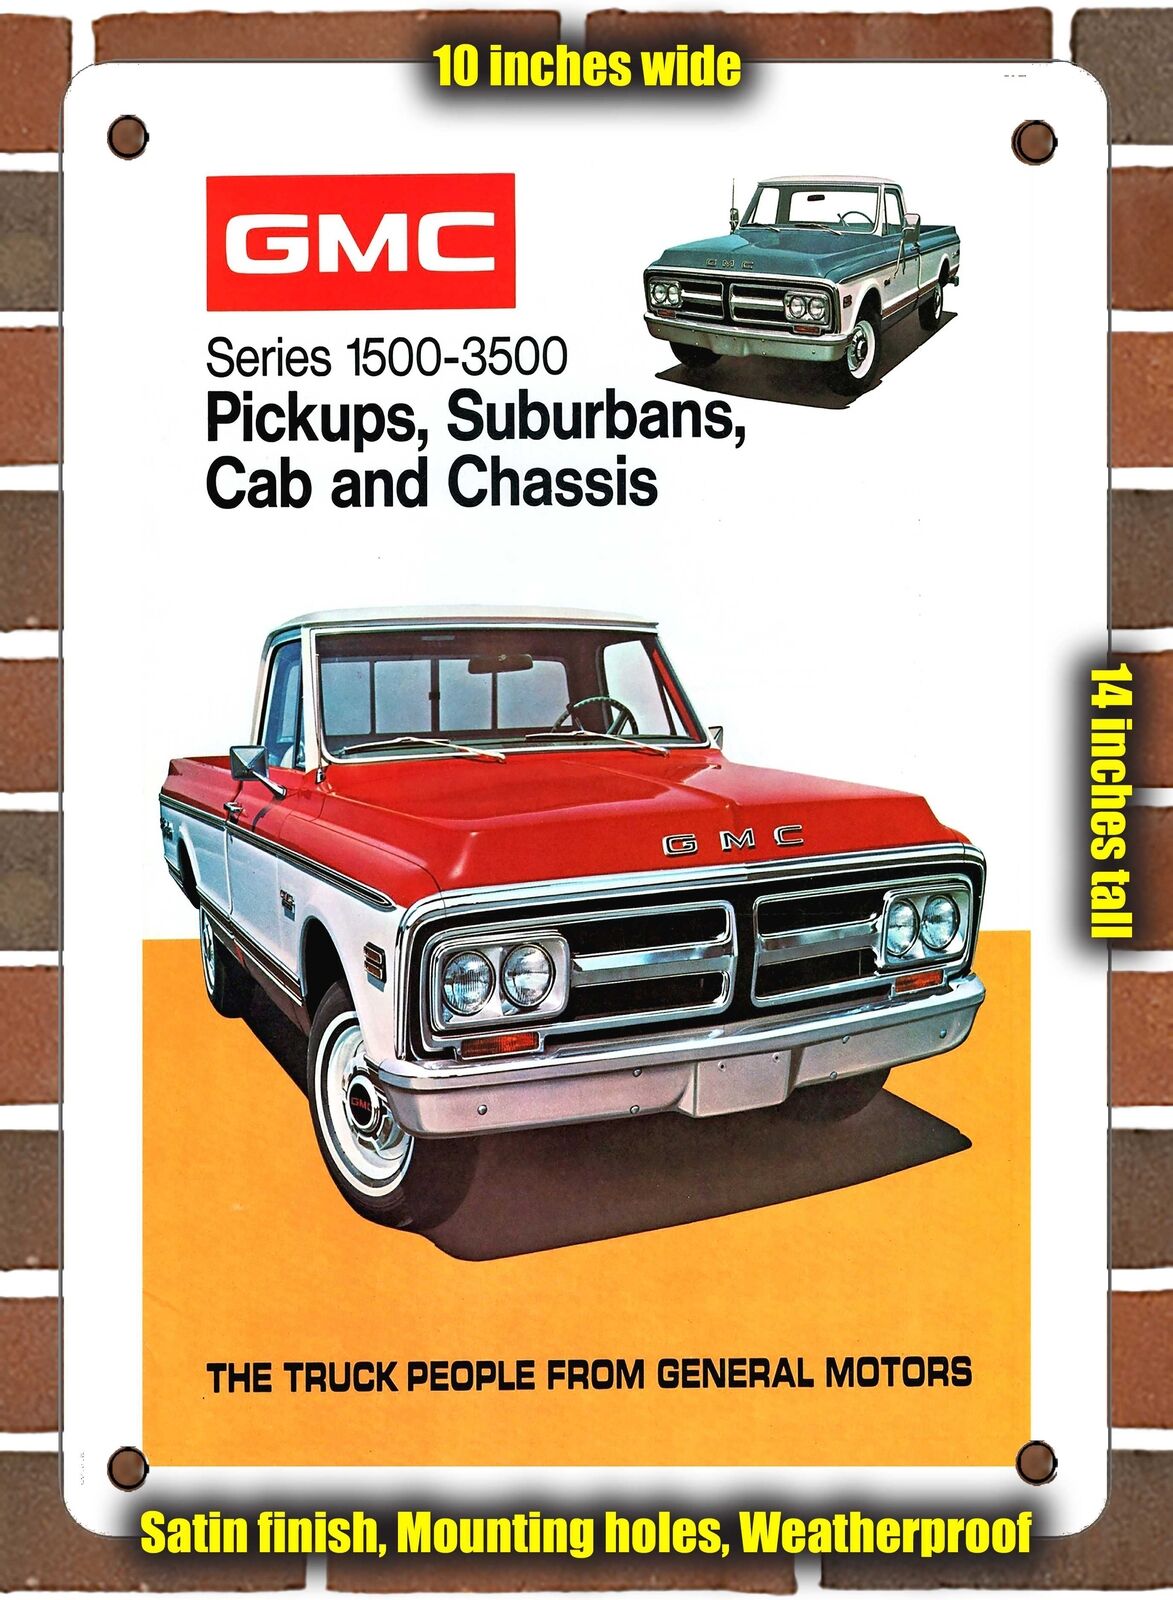 METAL SIGN - 1972 GMC Pickup Models - 10x14 Inches